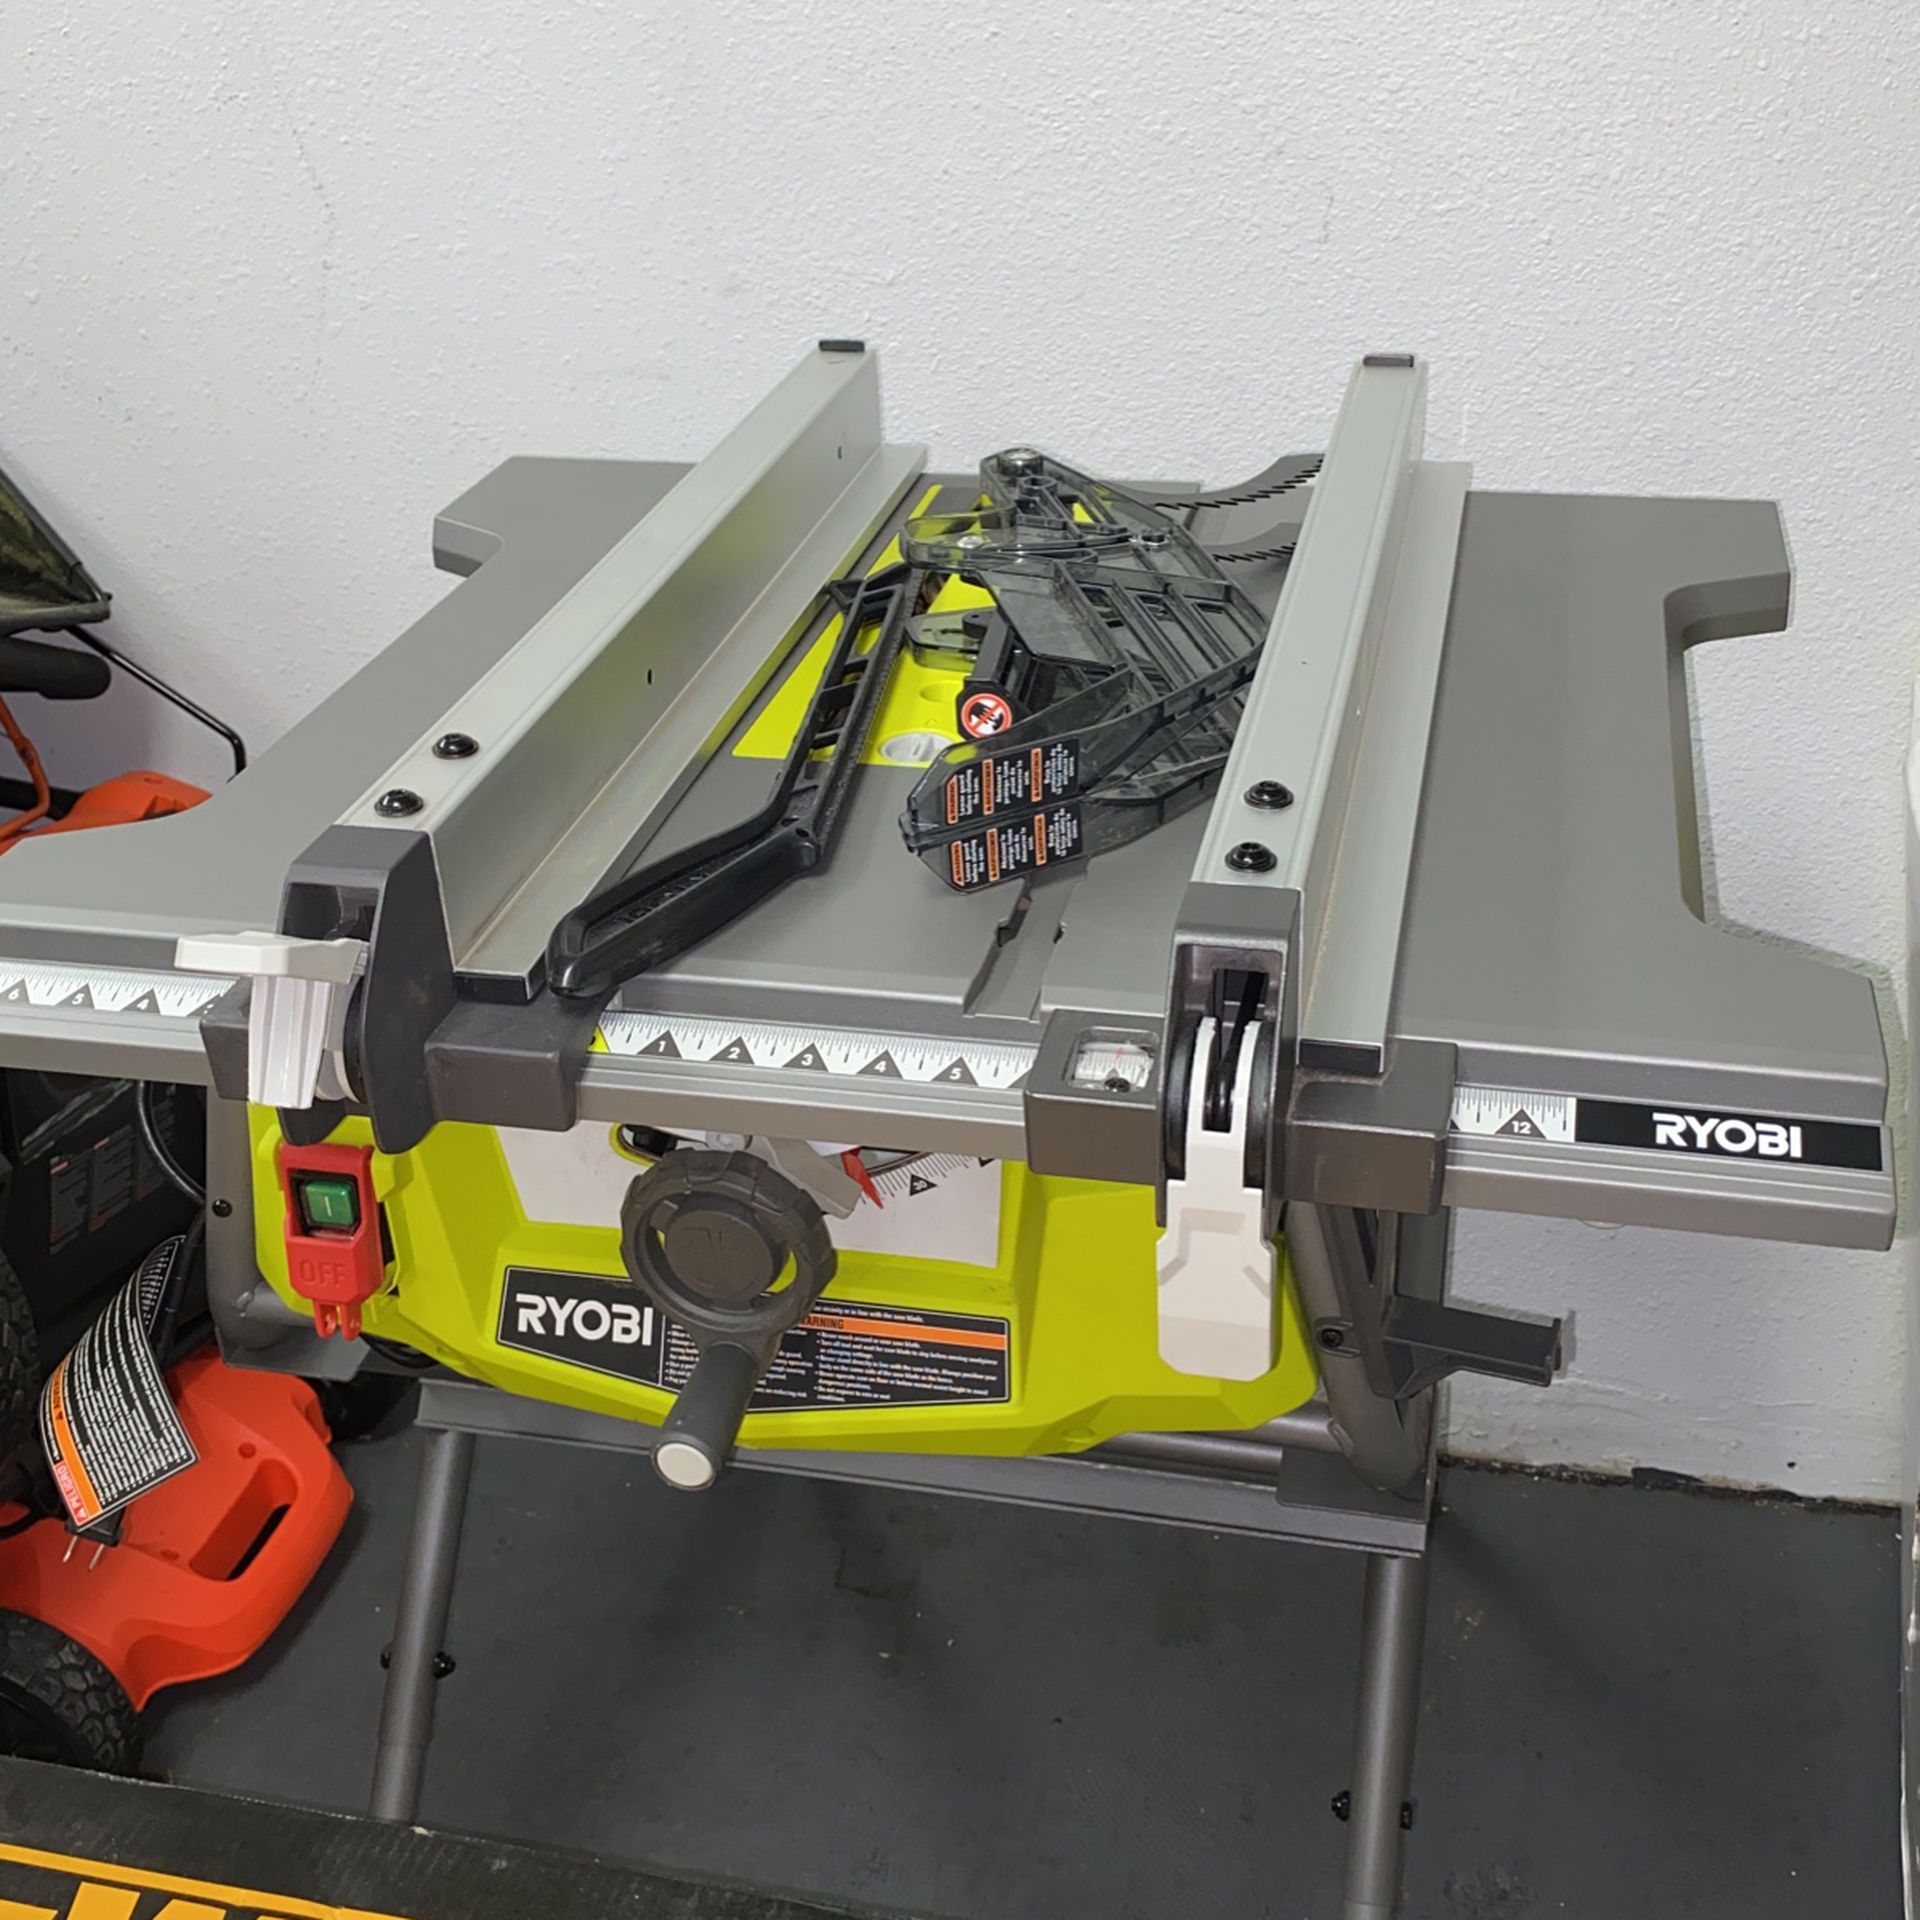 Ryobi 10 in Table Saw With Folding Stand $180